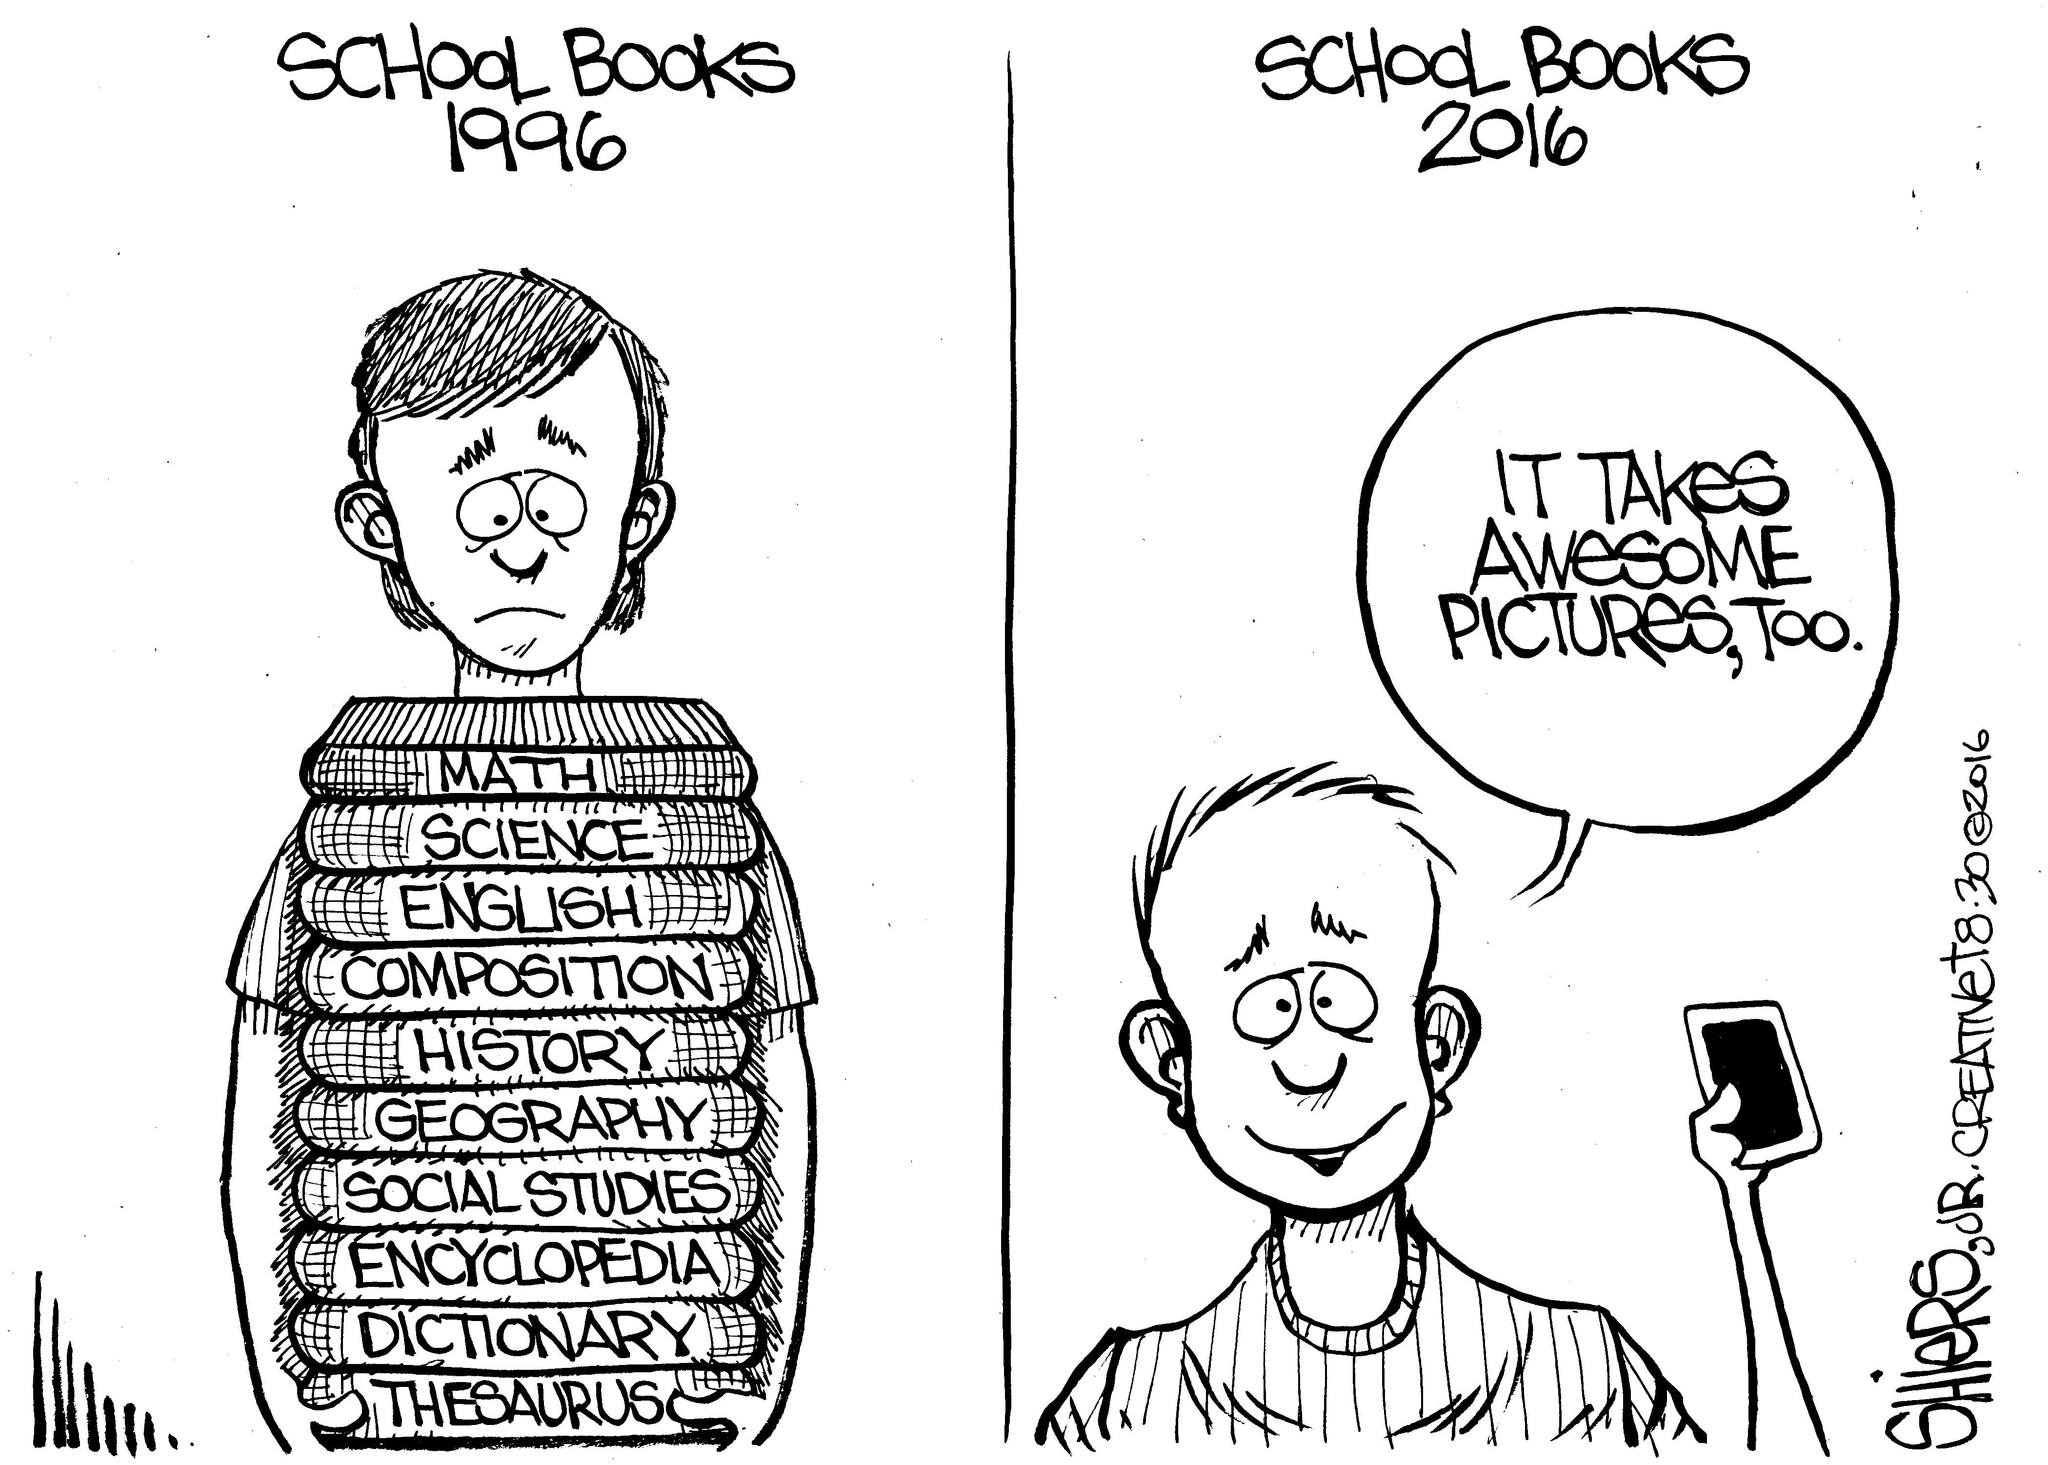 School books in 1996 and 2016 | Cartoon for Aug. 31 - Frank Shiers